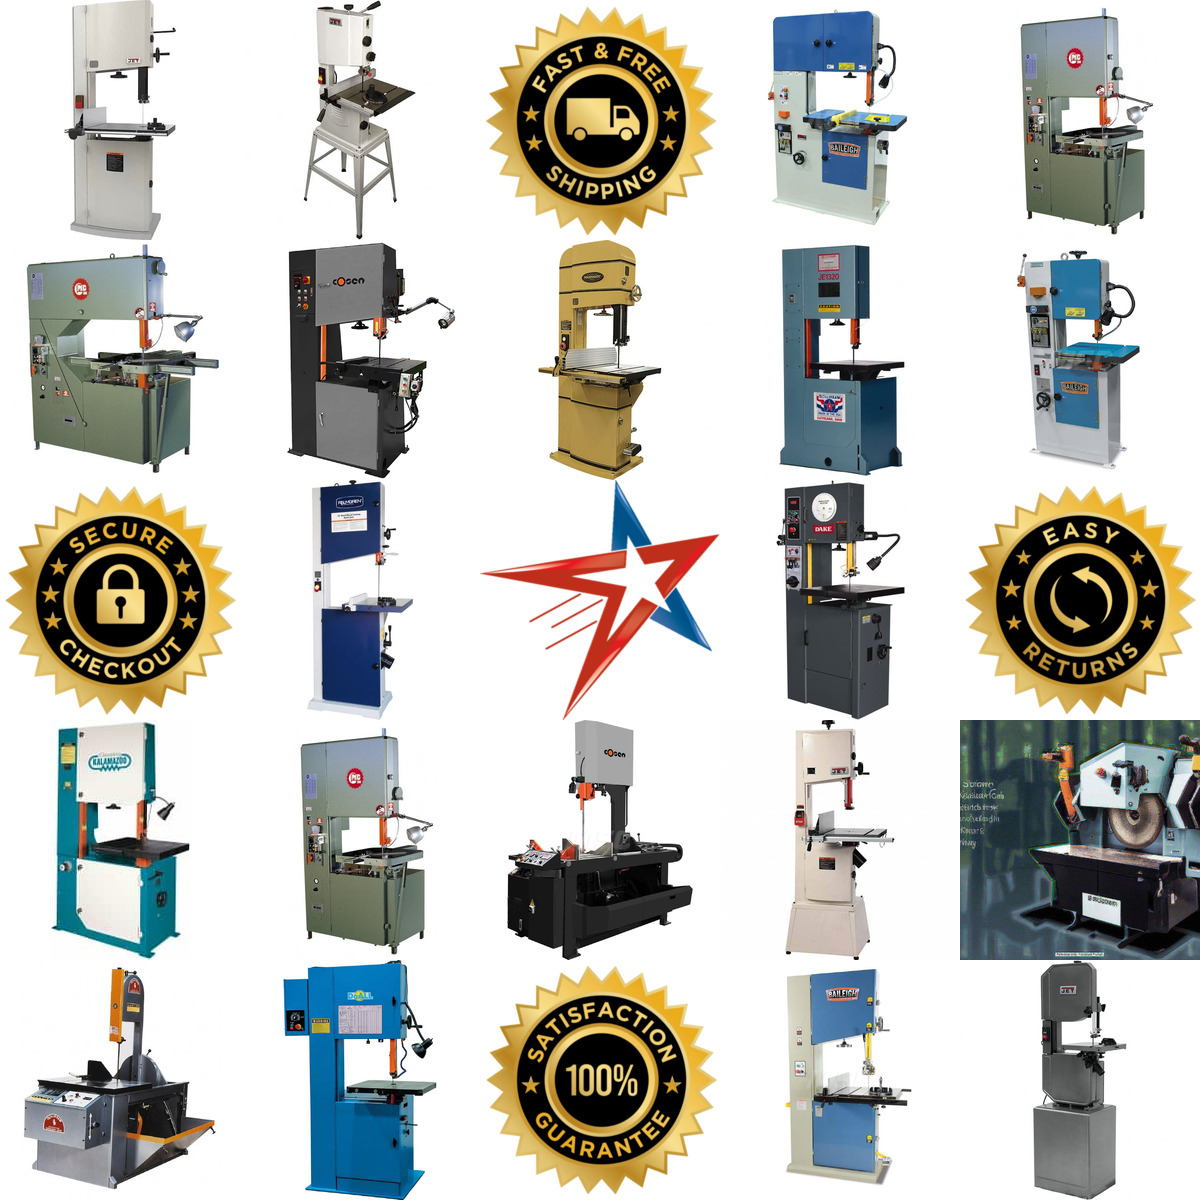 A selection of Vertical Bandsaws products on GoVets